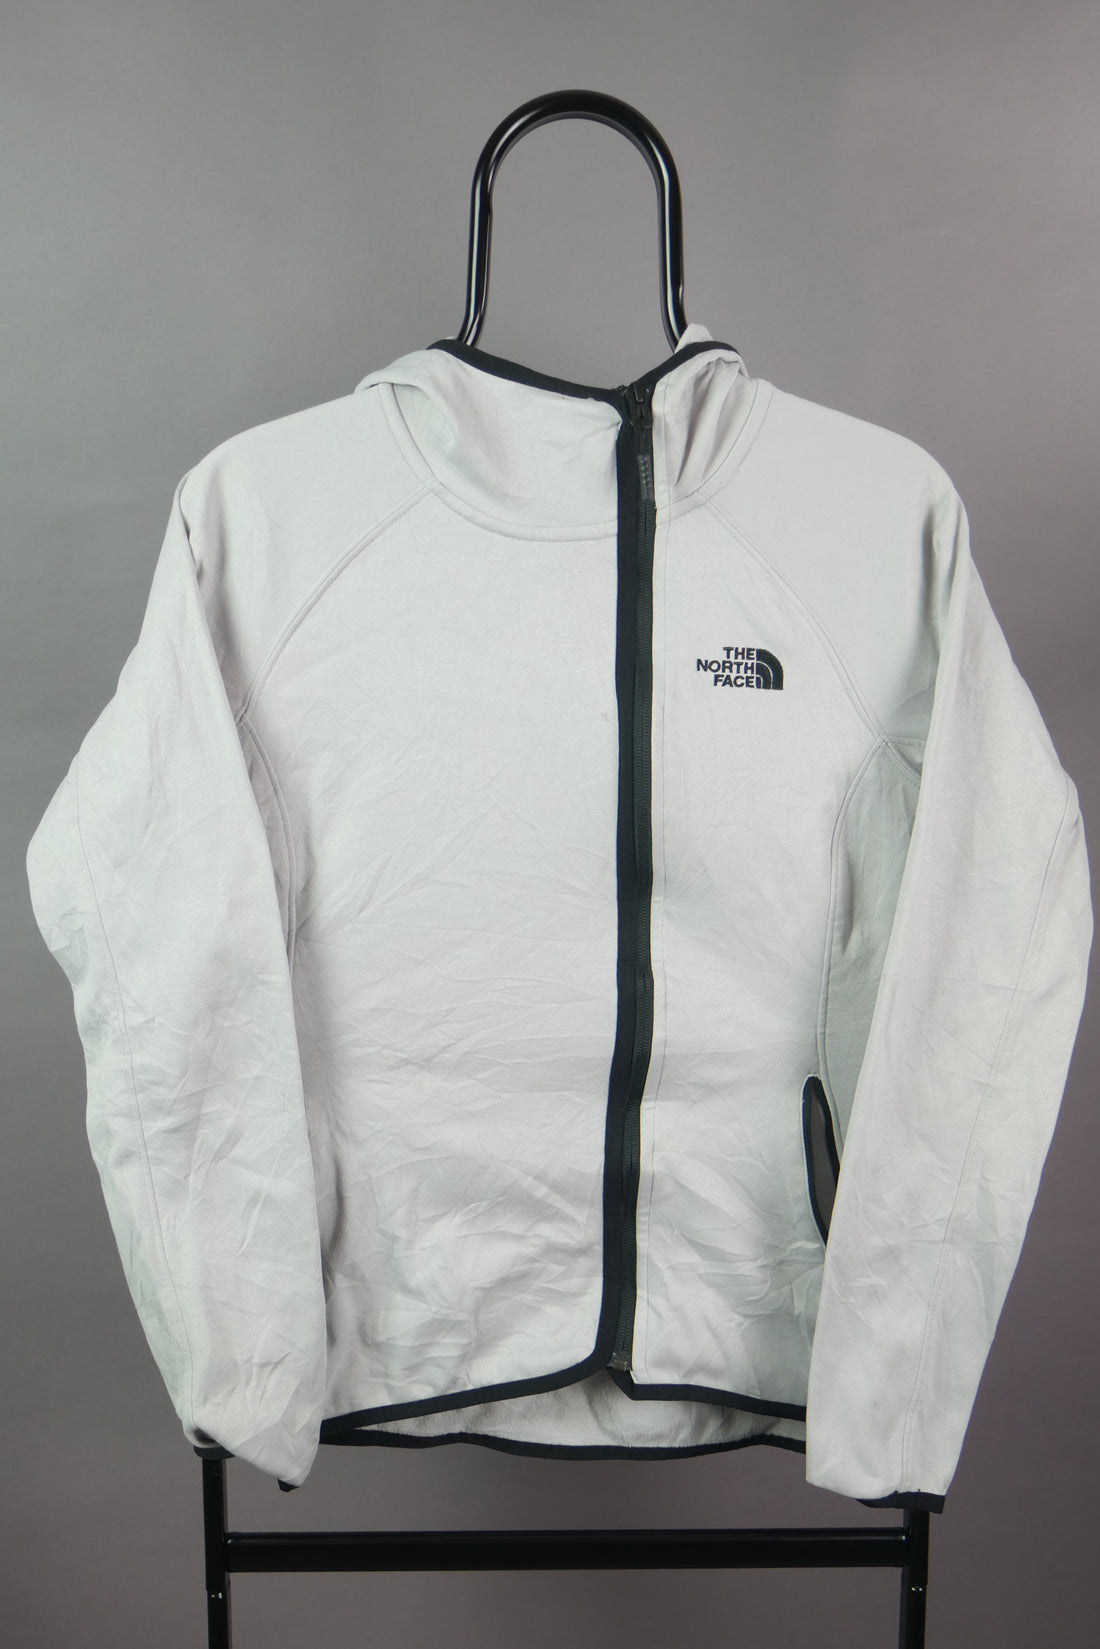 The North Face Asymmetric Zip Jacket (Womens S)